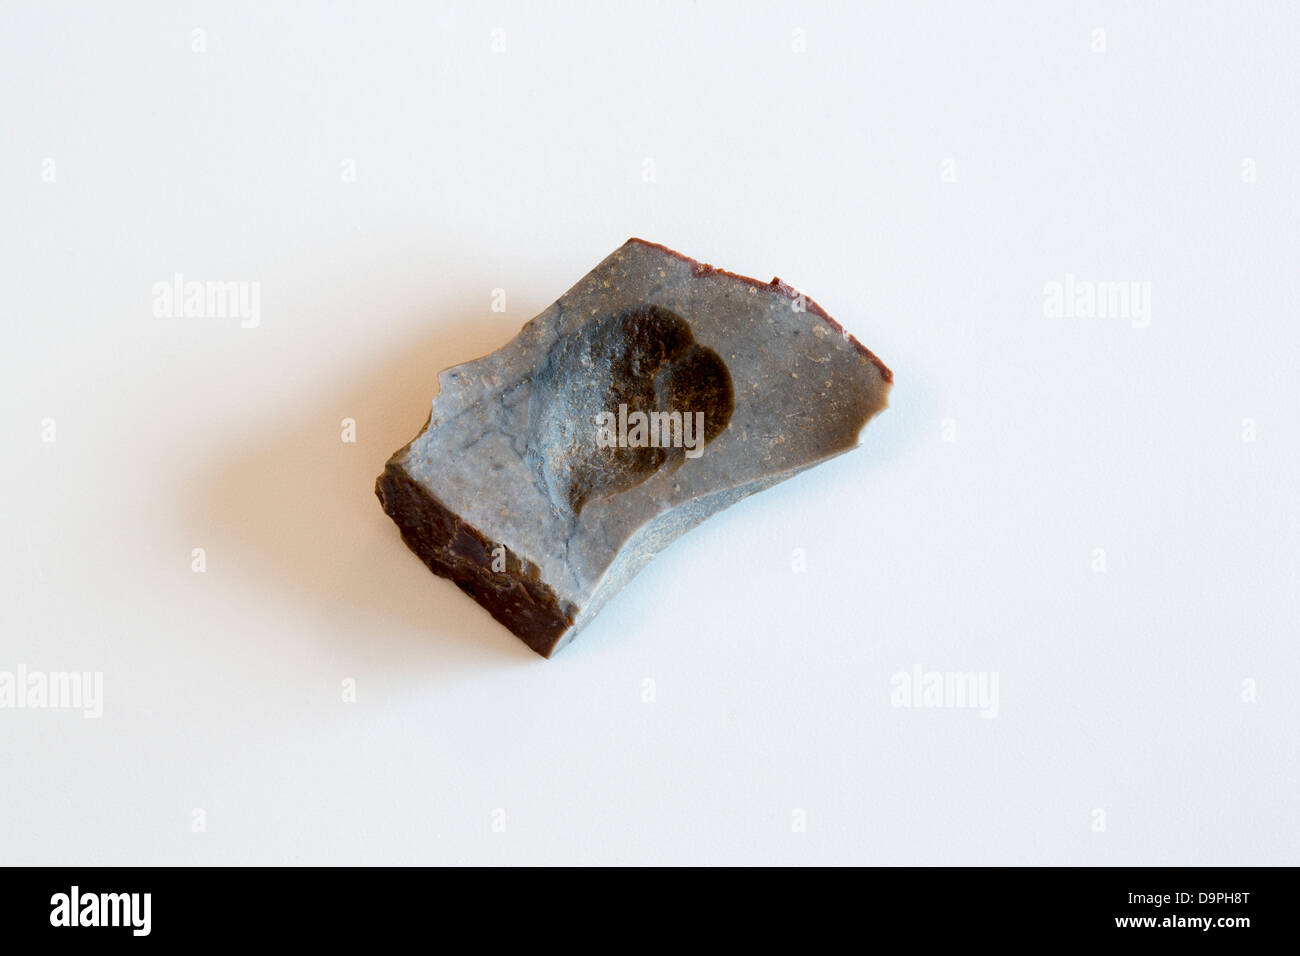 A close-up shot of an aboriginal stone cutting tool. It was found on a beach in Wollongong, Australia. Stock Photo